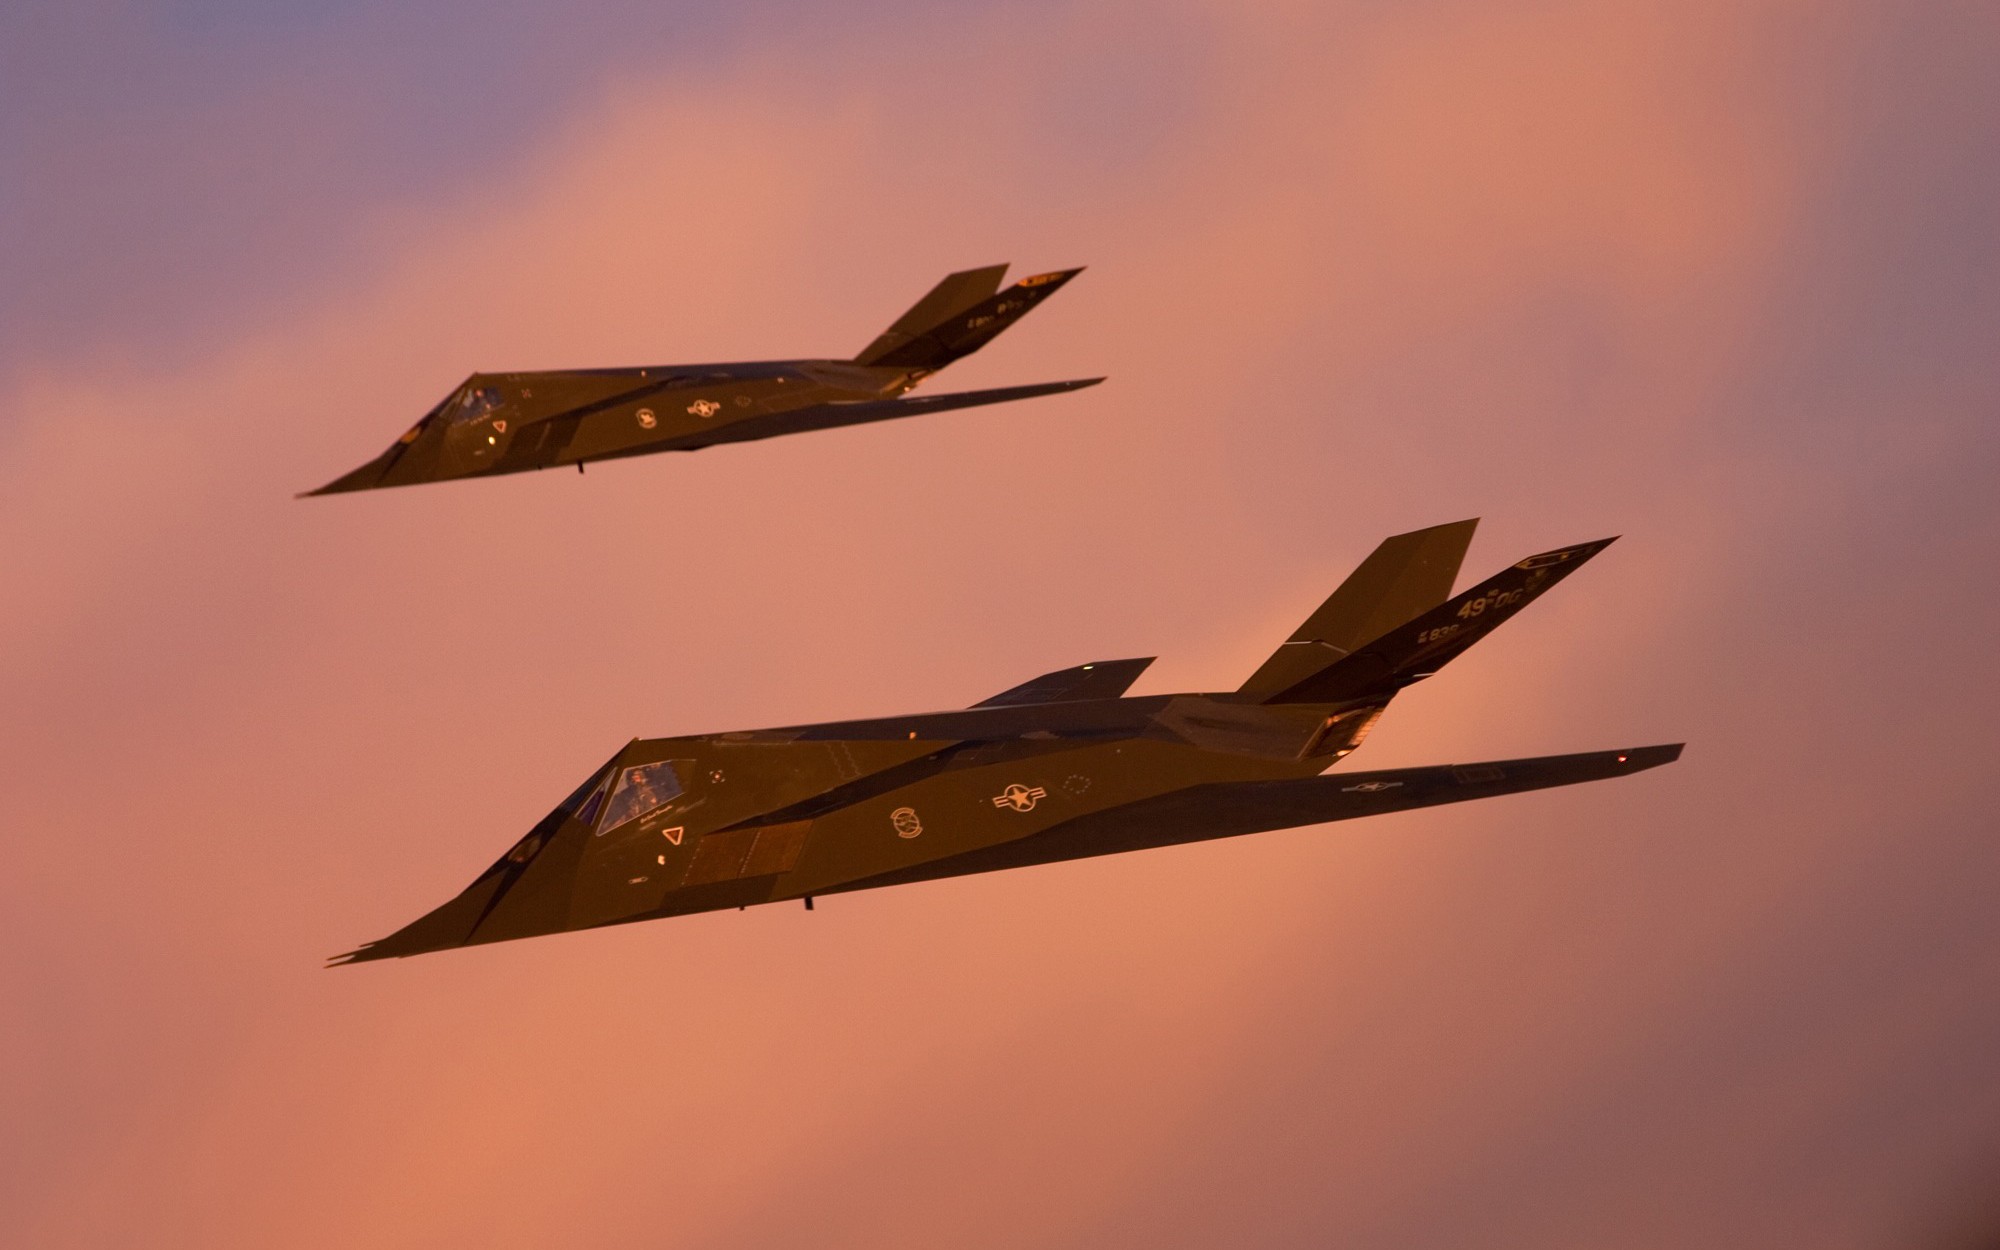 F 117 Nighthawk, Aircraft, Stealth, Military Aircraft, Sunset, US Air Force, Strategic Bomber Wallpaper